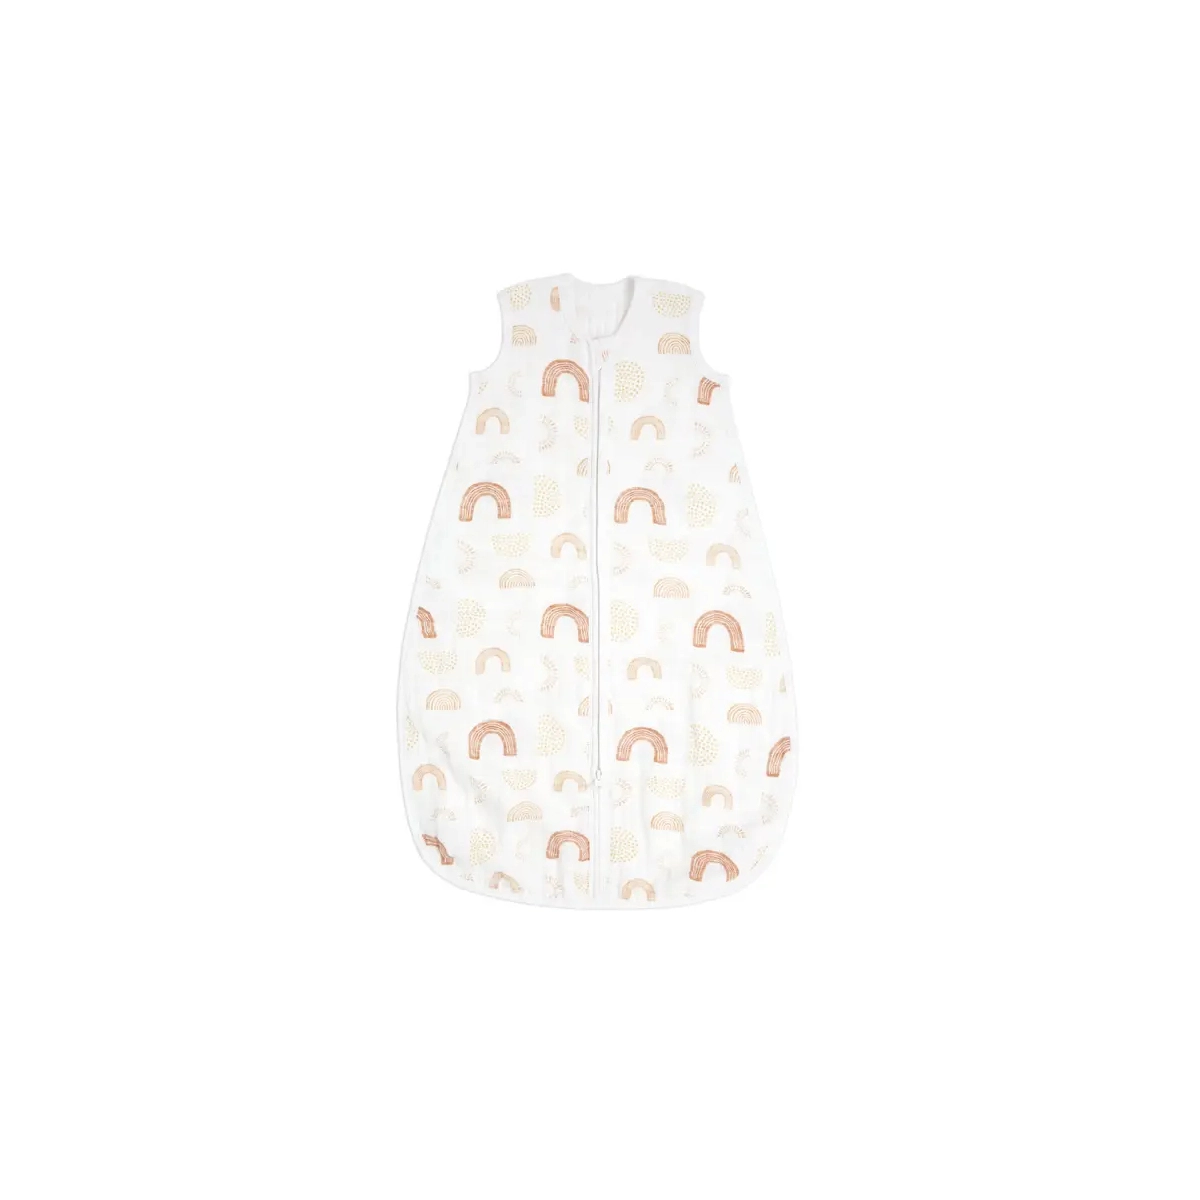 Image of Aden + Anais Light Sleeping Bag 1.0 TOG Cotton Muslin 0-6 Months - Keep Rising/Oh Happy Day (23-19-161)